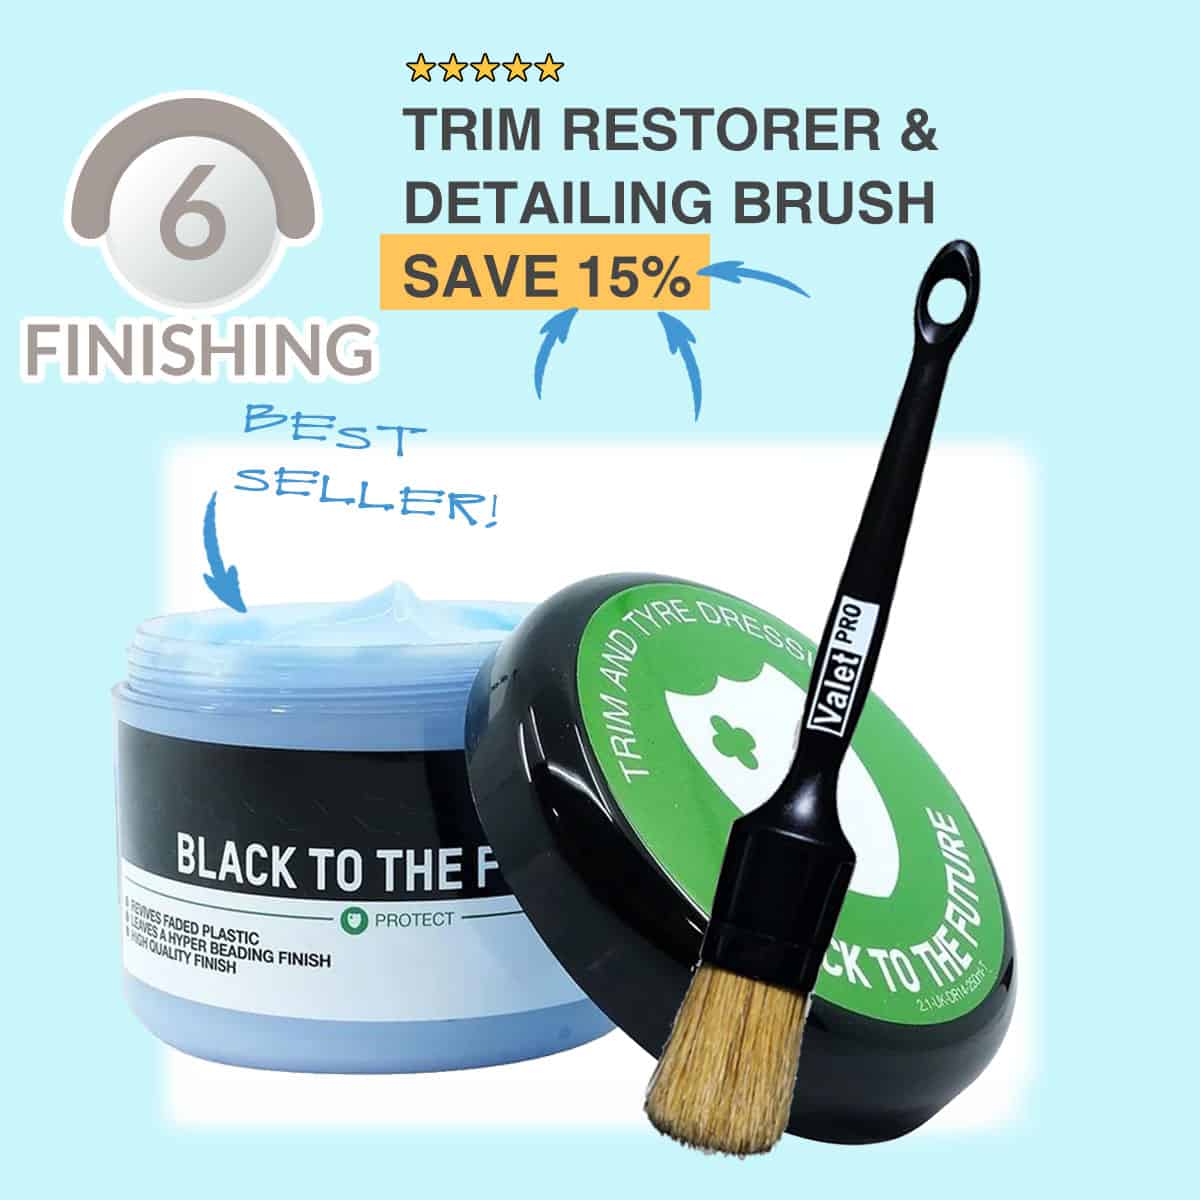 The Motohut FINISH Stage Trim & Tyre Restorer & Detailing Brush Bundle: The best-sellers plastics & rubber treatment AND the perfect brush to apply it